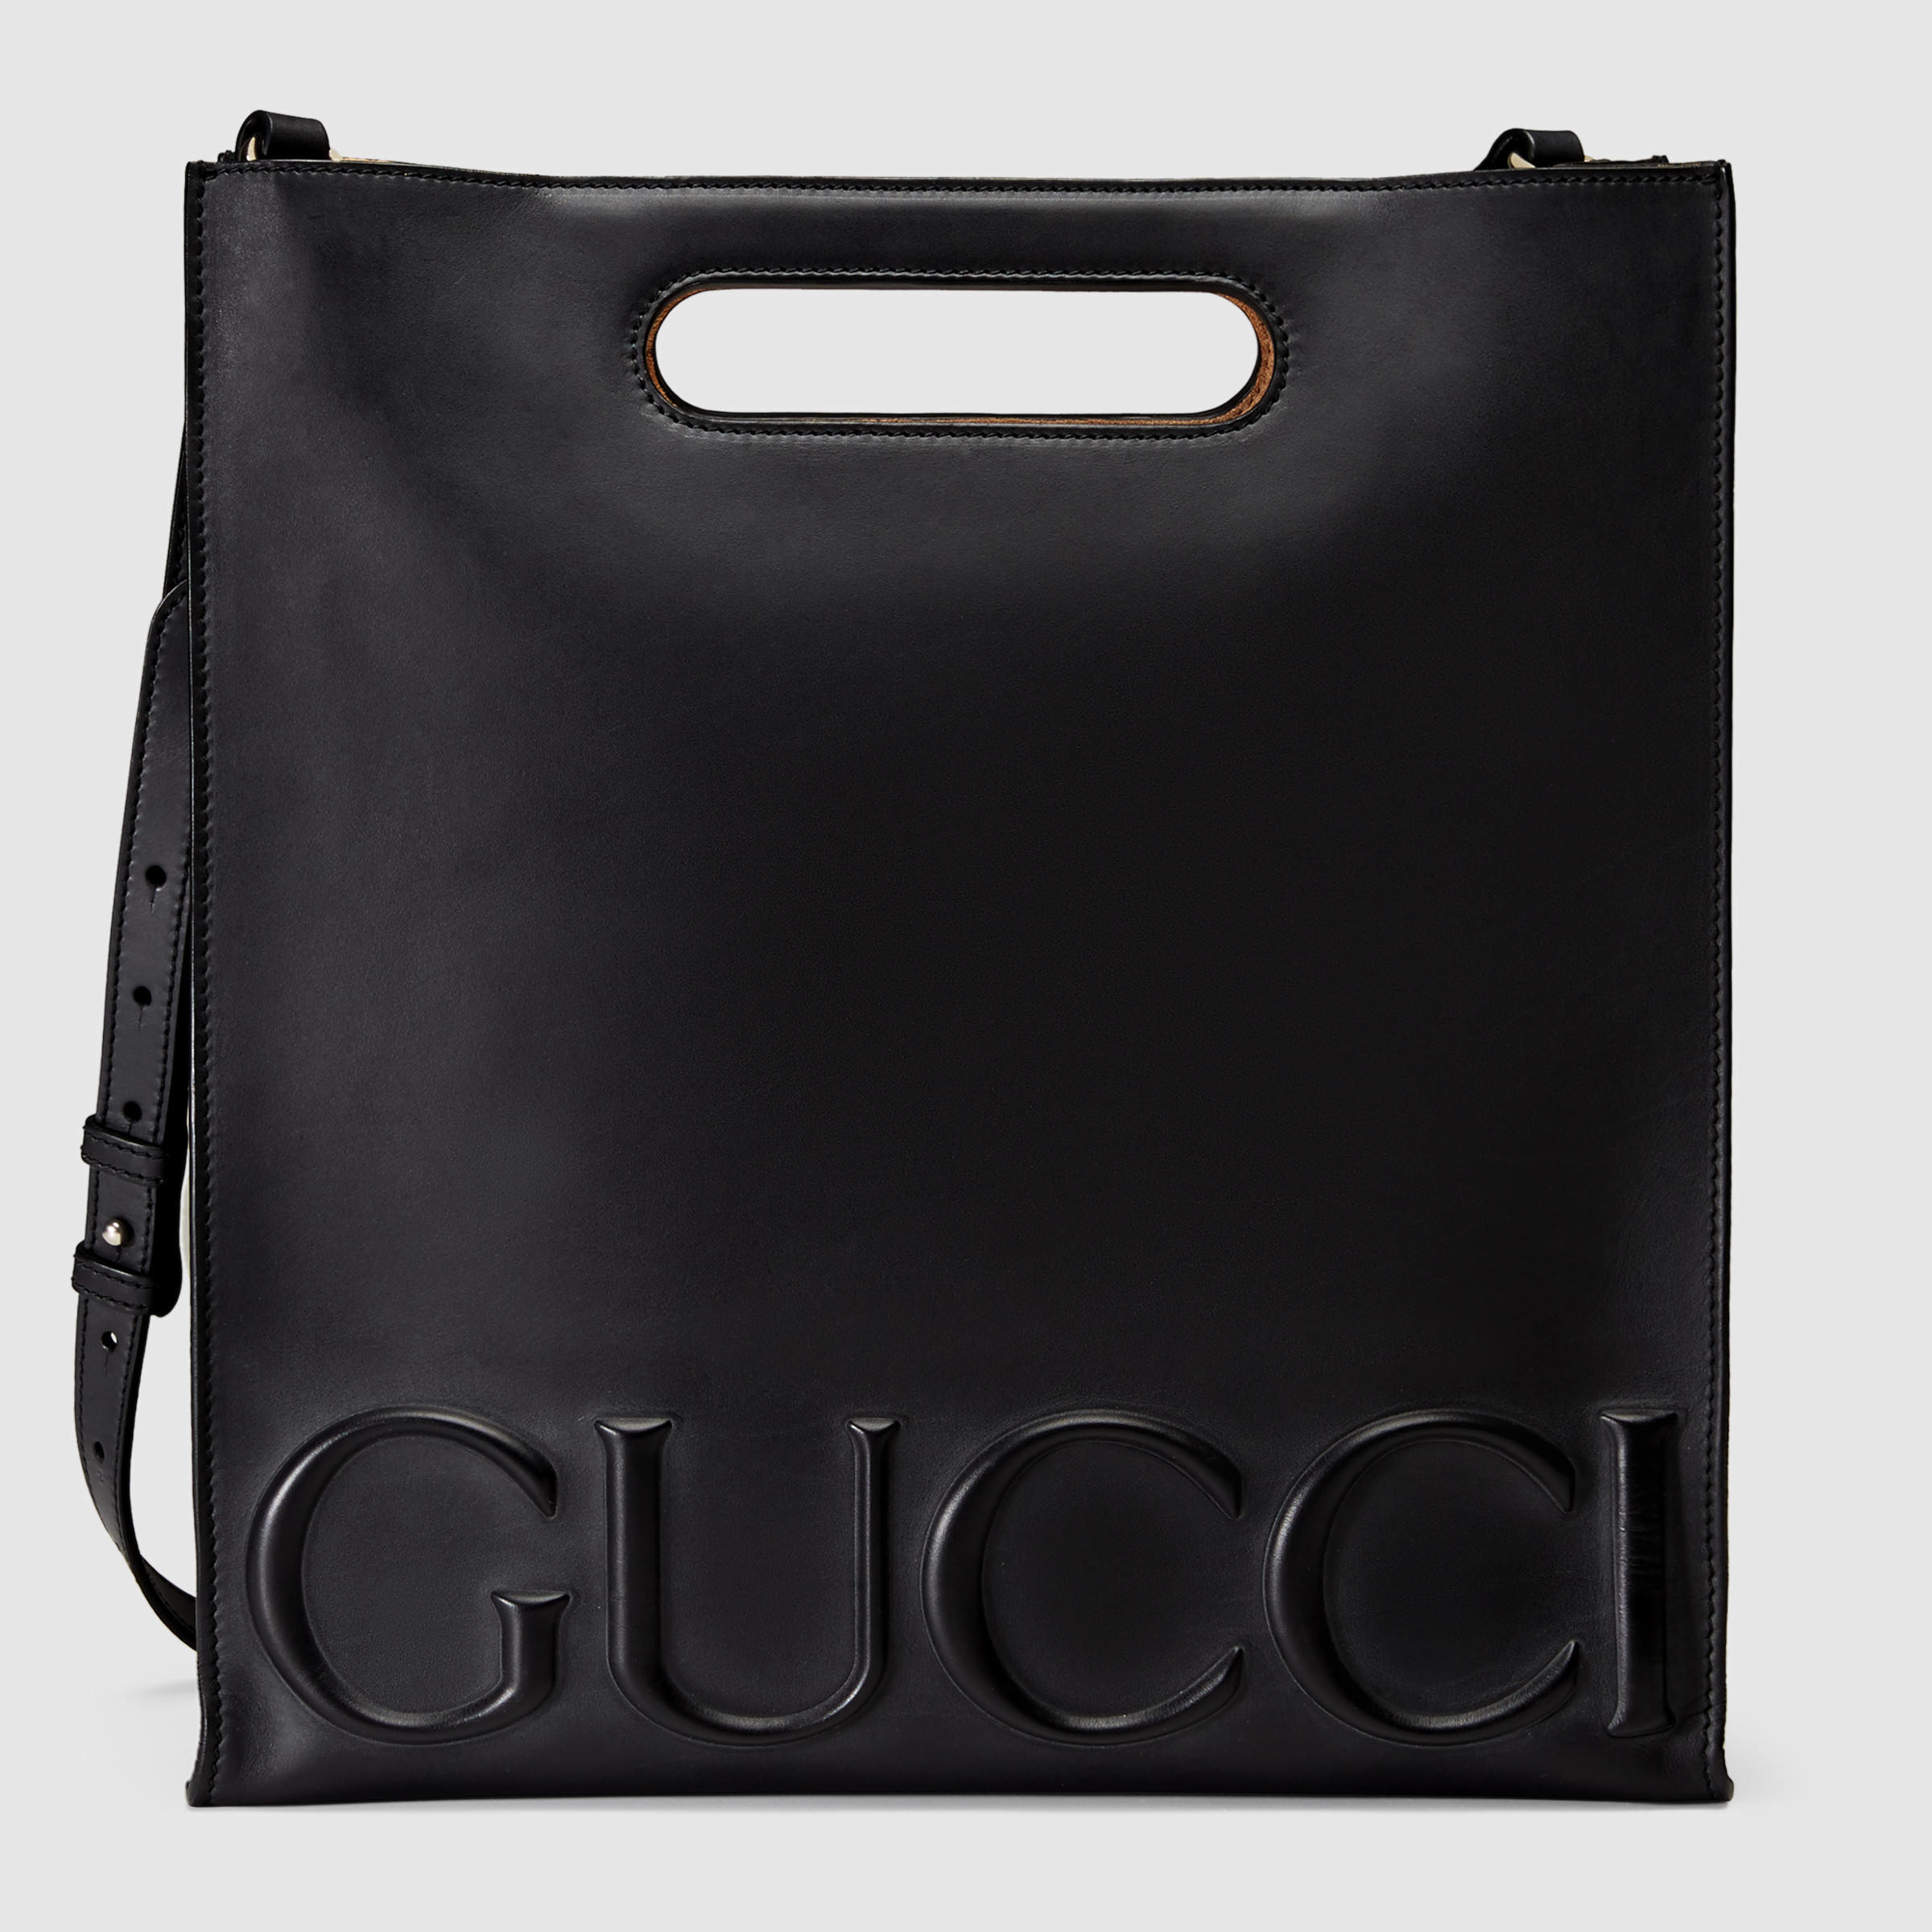 Gucci XL Leather Tote in Black - Lyst